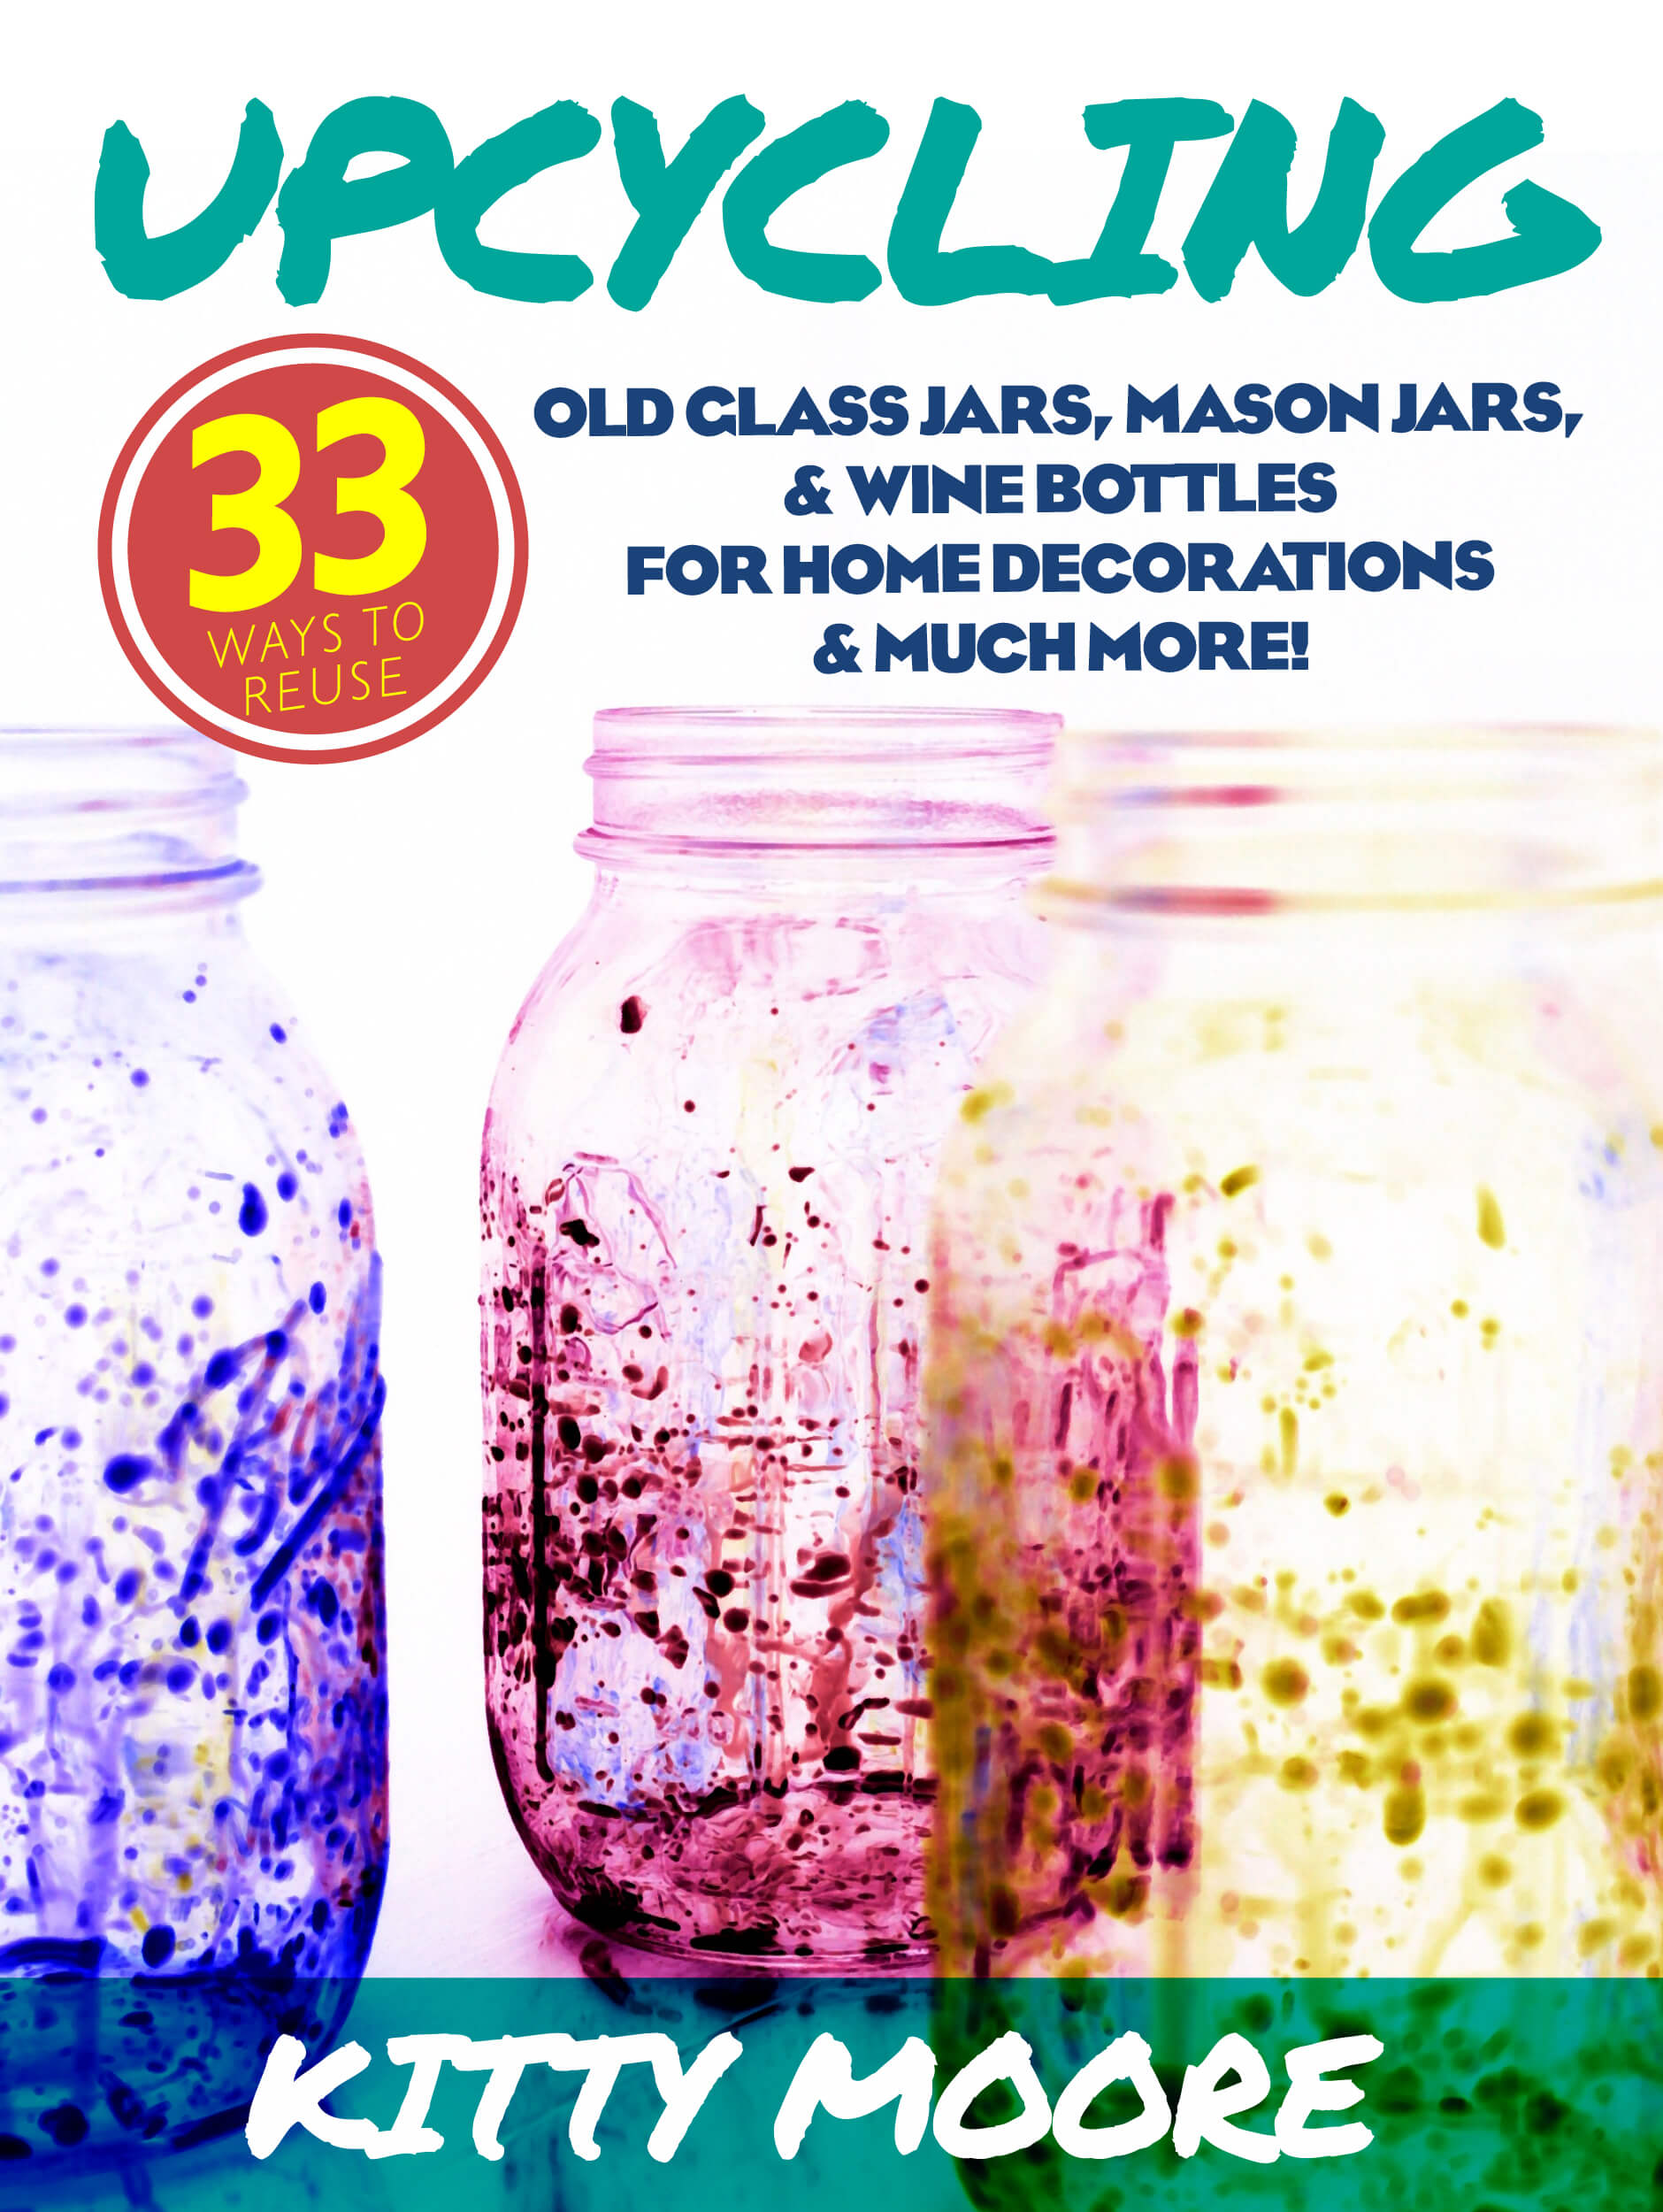 FREE: Upcycling: 33 Ways To Reuse Old Glass Jars, Mason Jars, & Wine Bottles For Home Decorations & Much More! by Kitty Moore